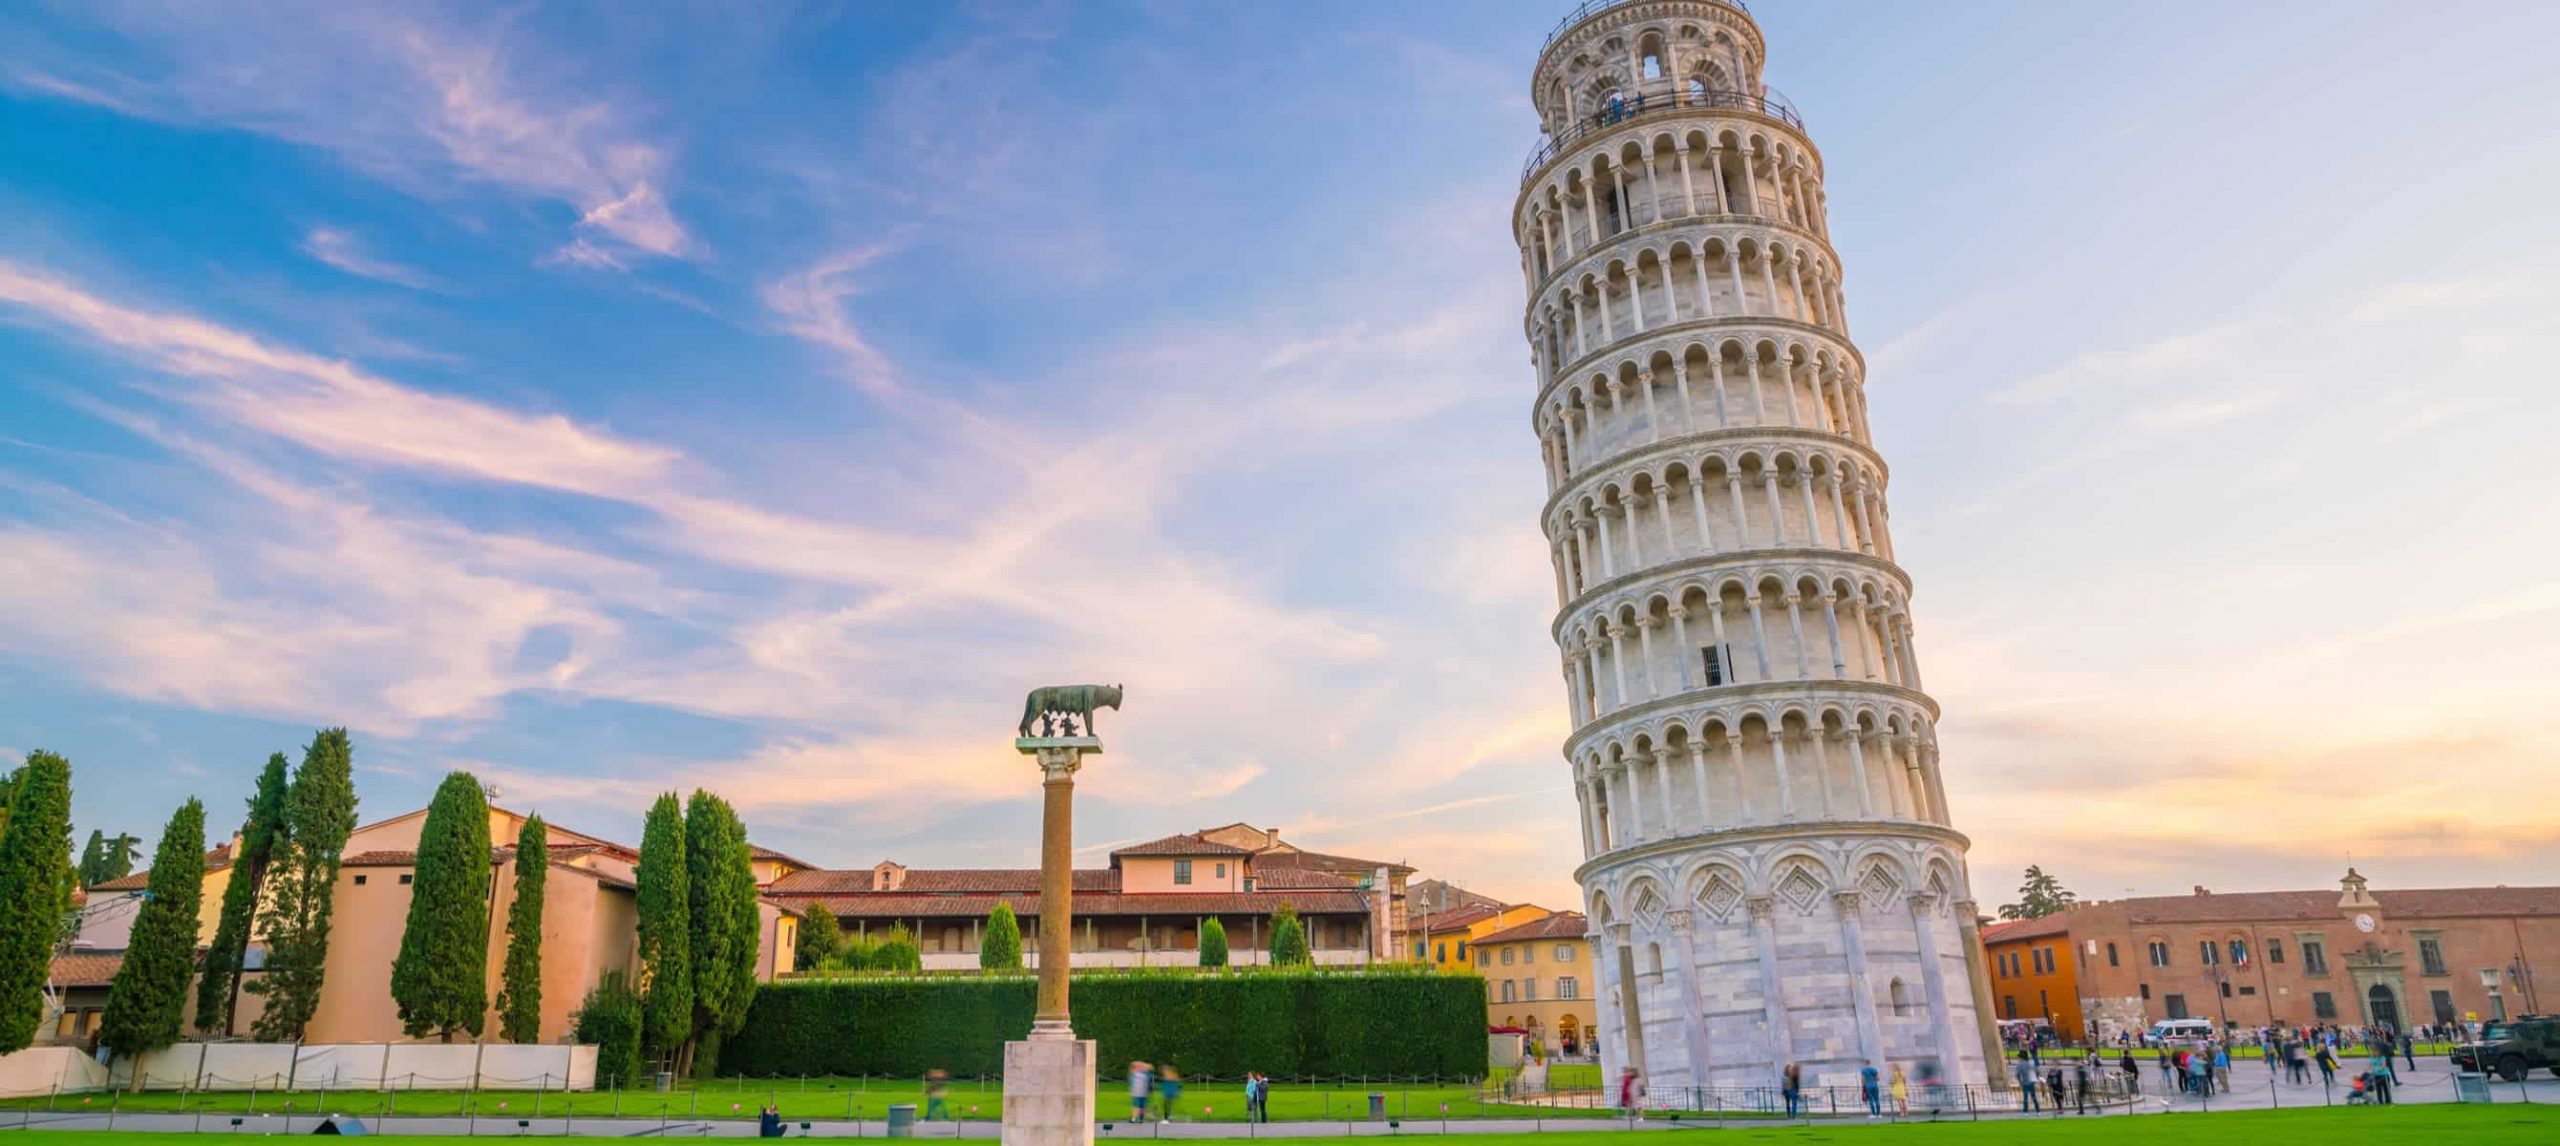 How to Get From Florence to Pisa: The 3 Best Ways